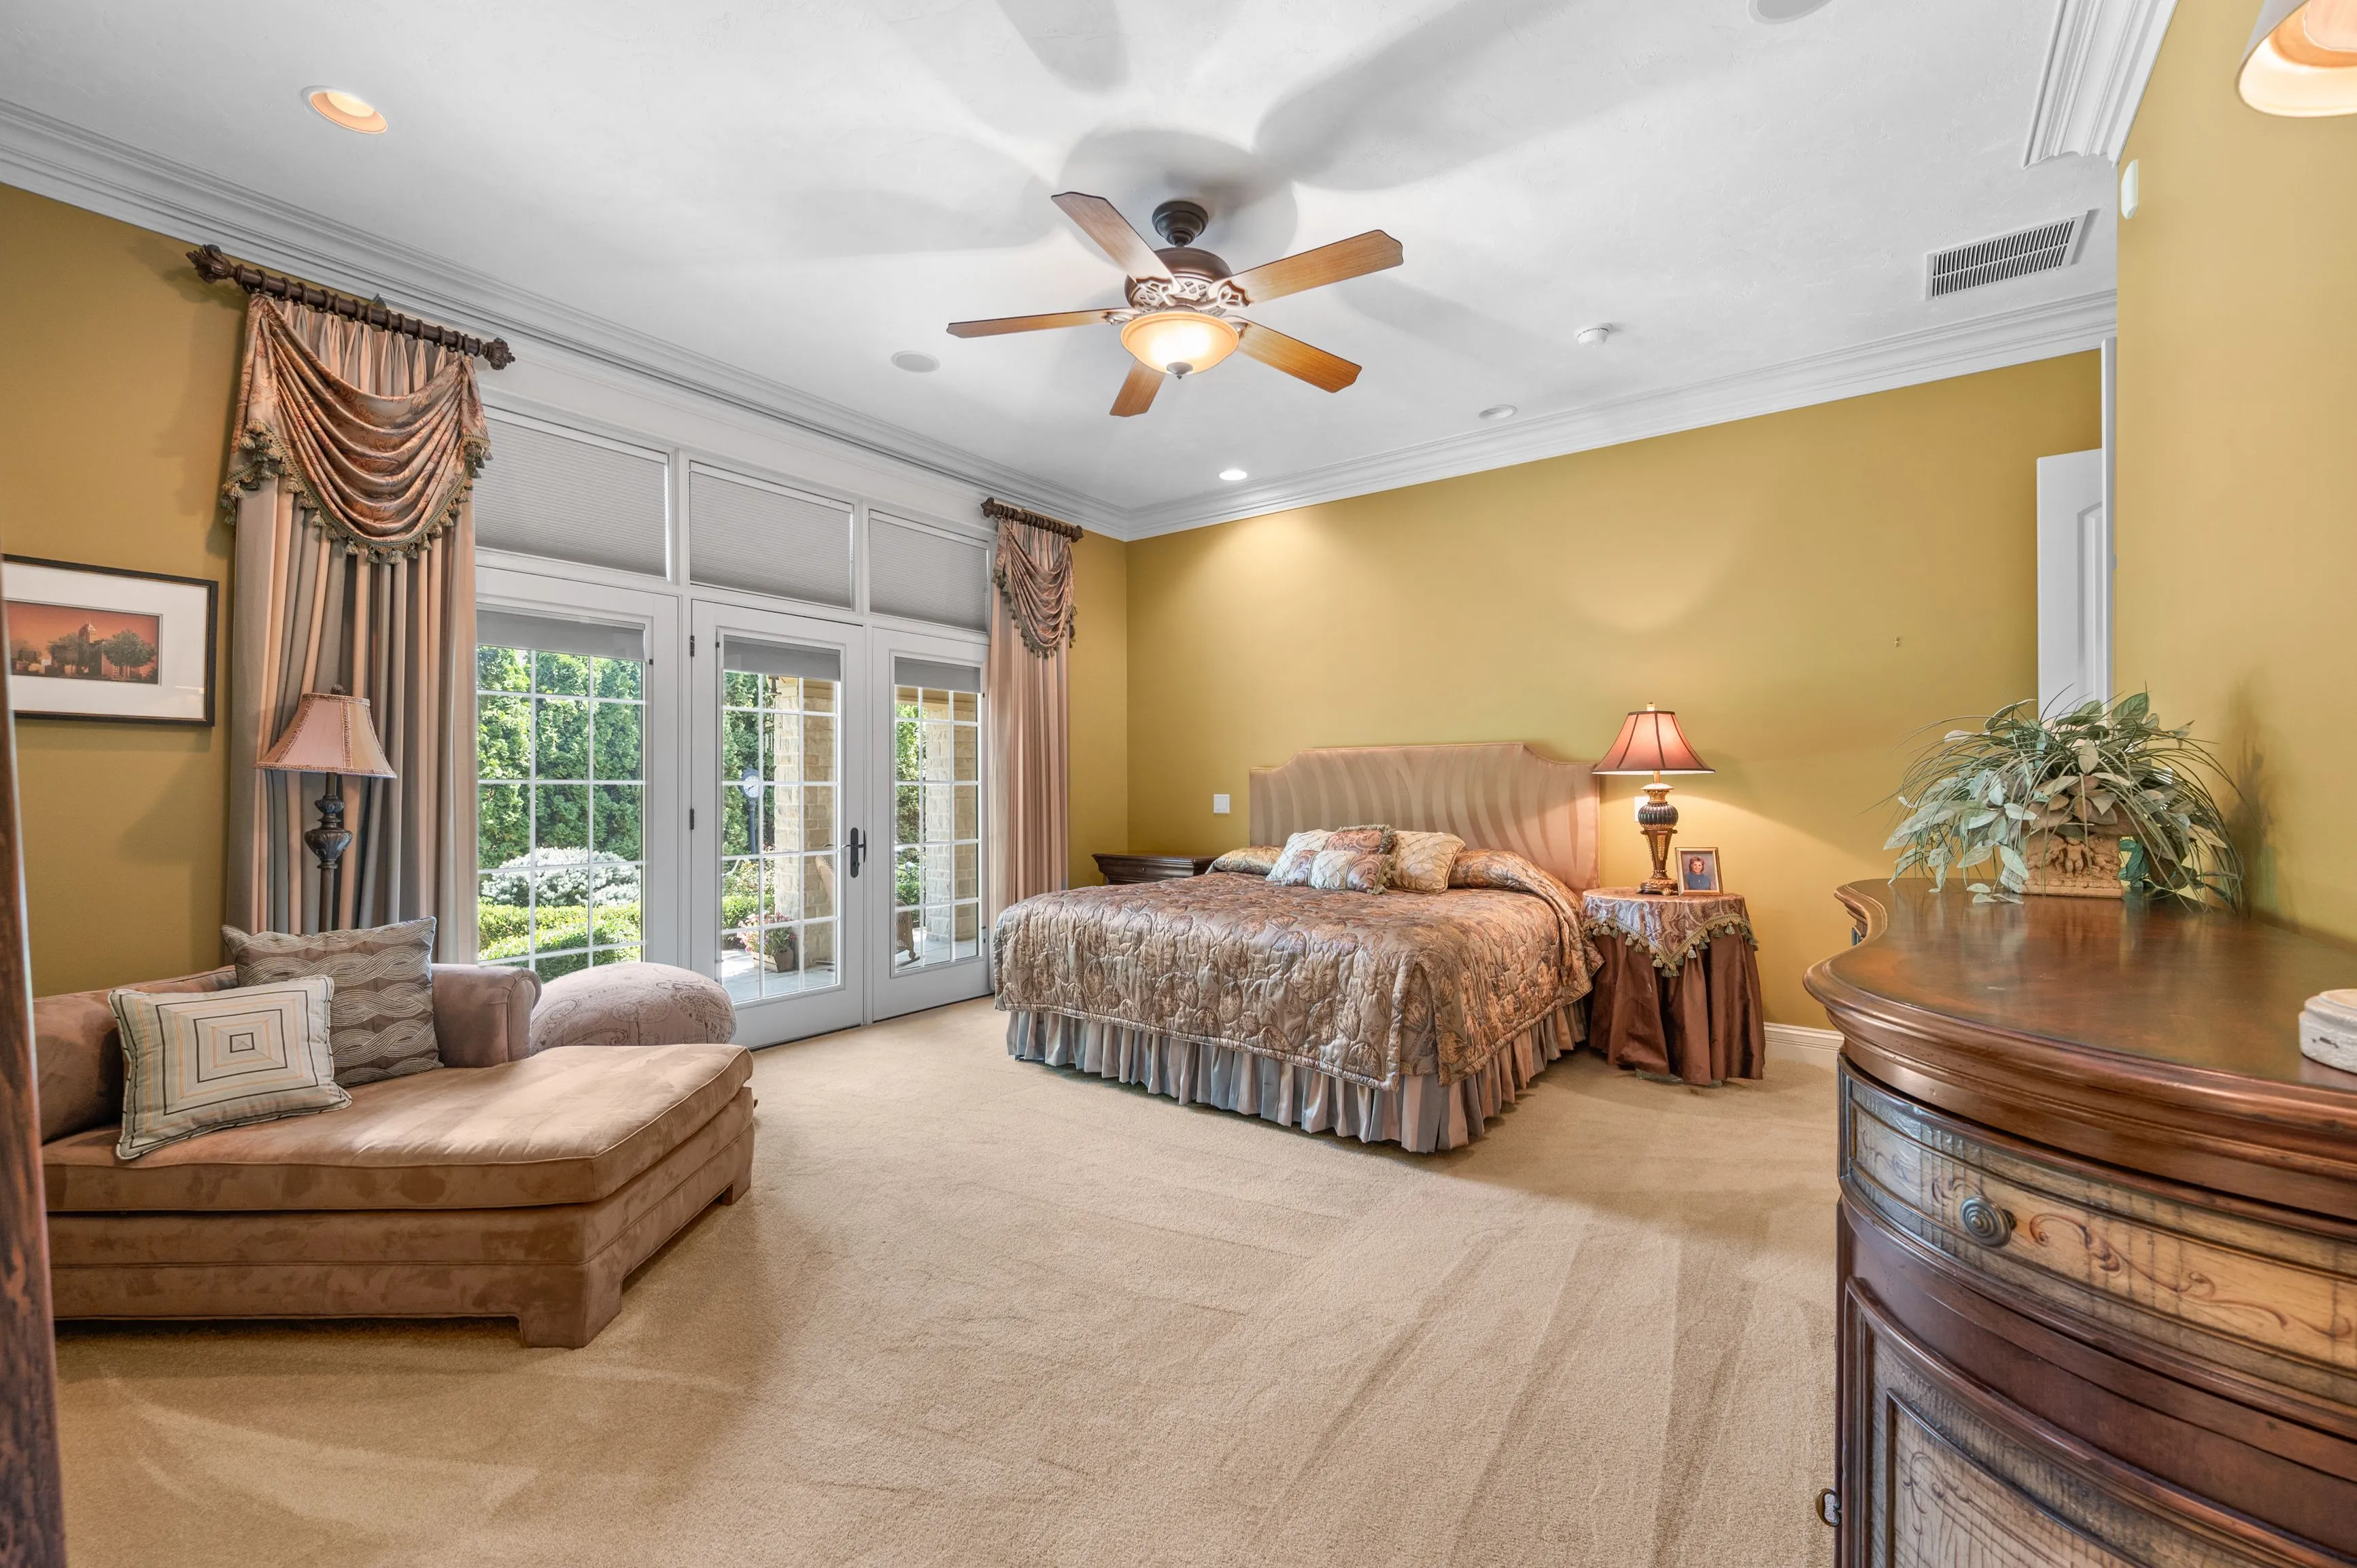 Spacious bedroom with yellow walls, a large bed with patterned bedding, elegant drapes on windows, ceiling fan, and plush carpeting.